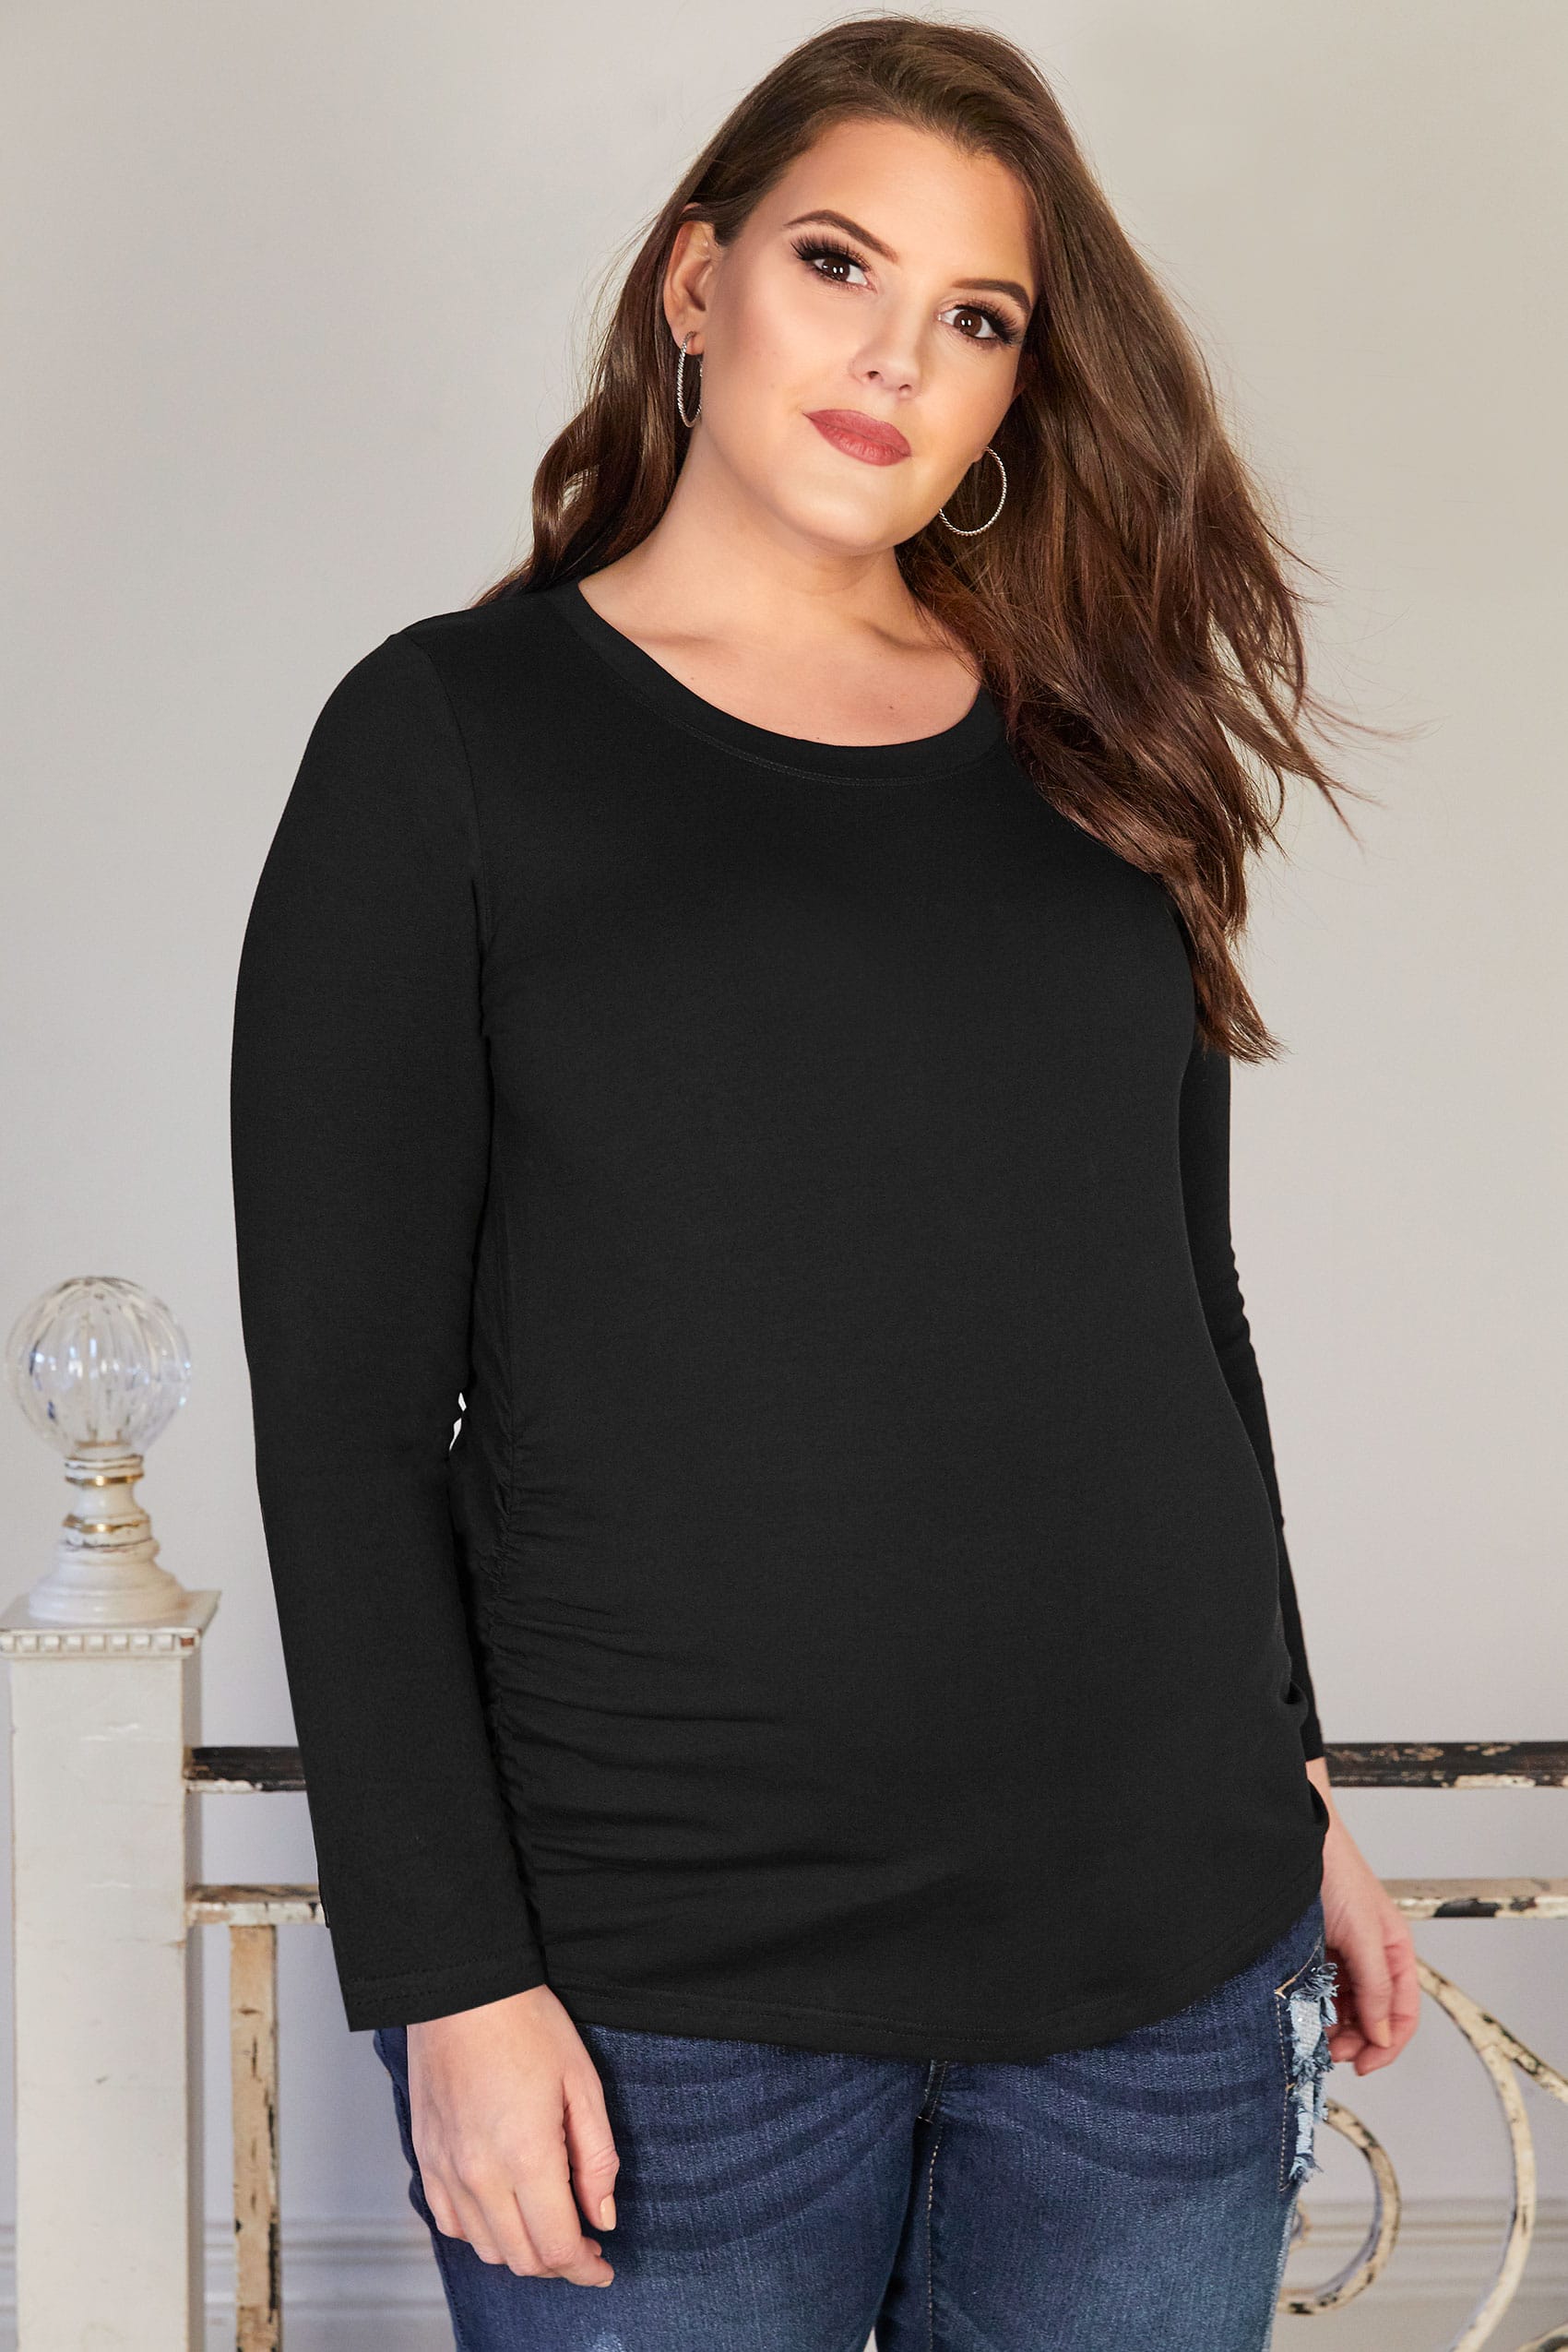 BUMP IT UP MATERNITY Black Cotton Long Sleeved Top Plus 